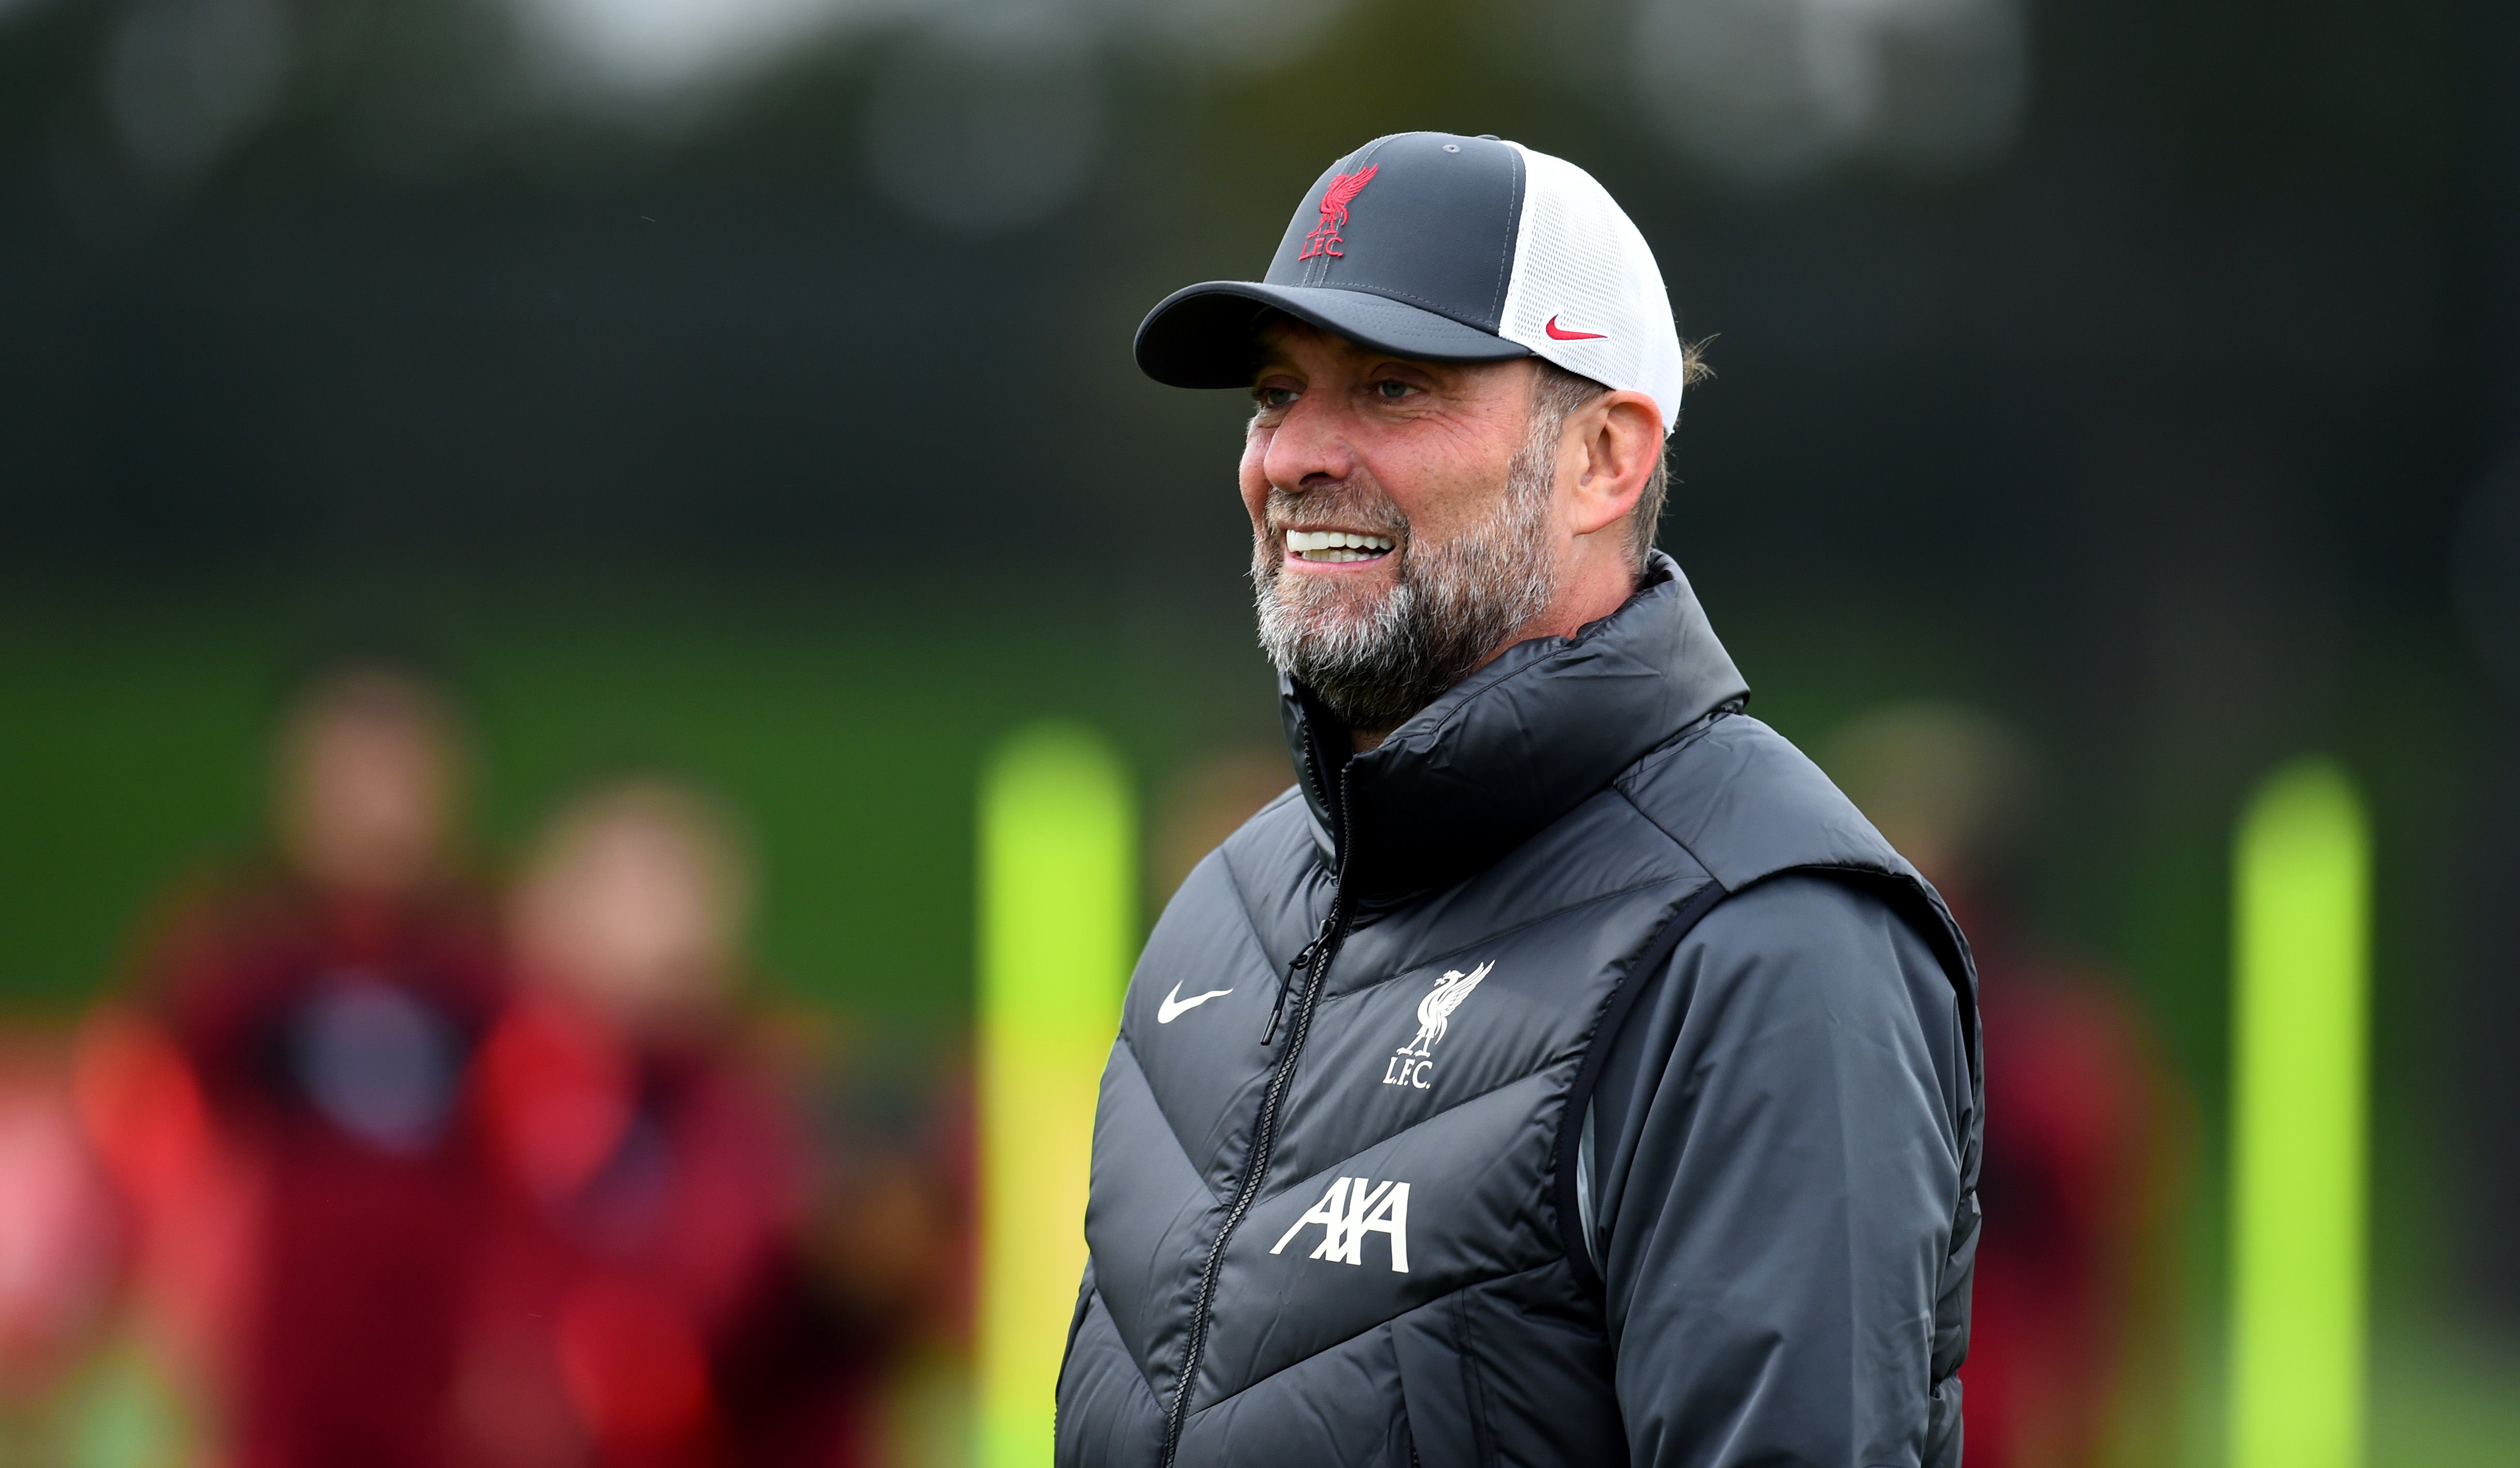 Klopp’s Liverpool will face Manchester United on Sunday